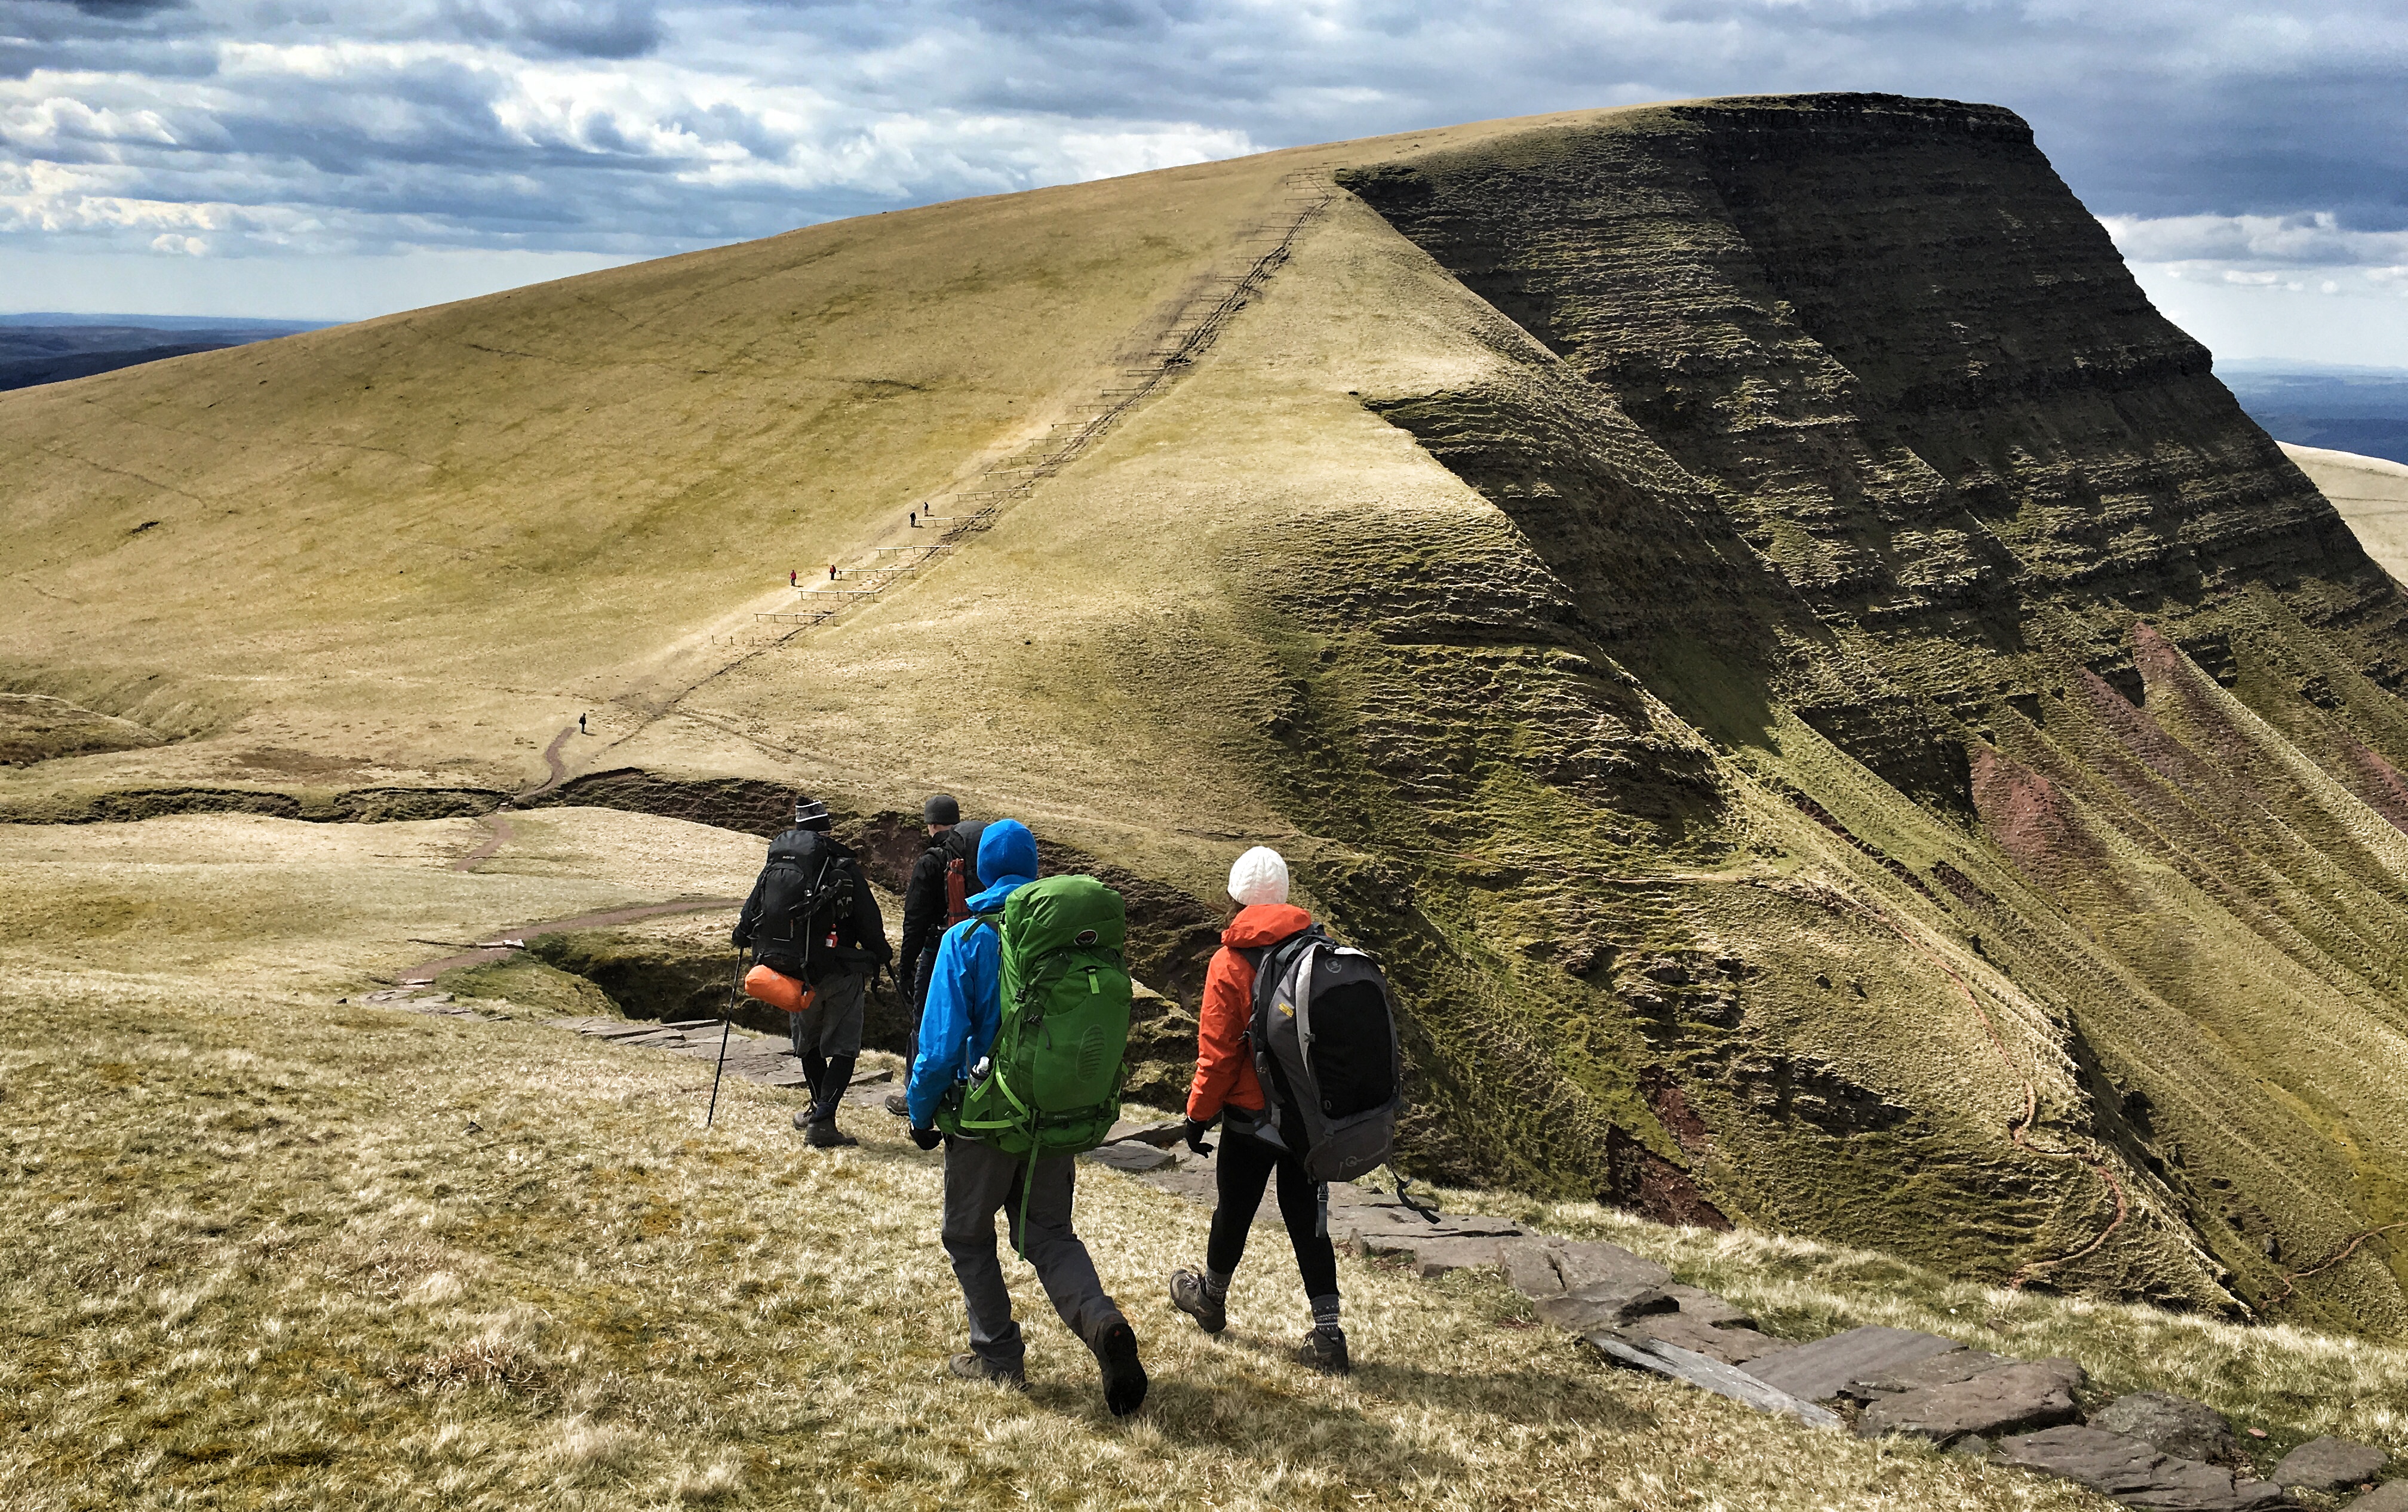 Brecon Beacons multi-day hike | Hiking and camping